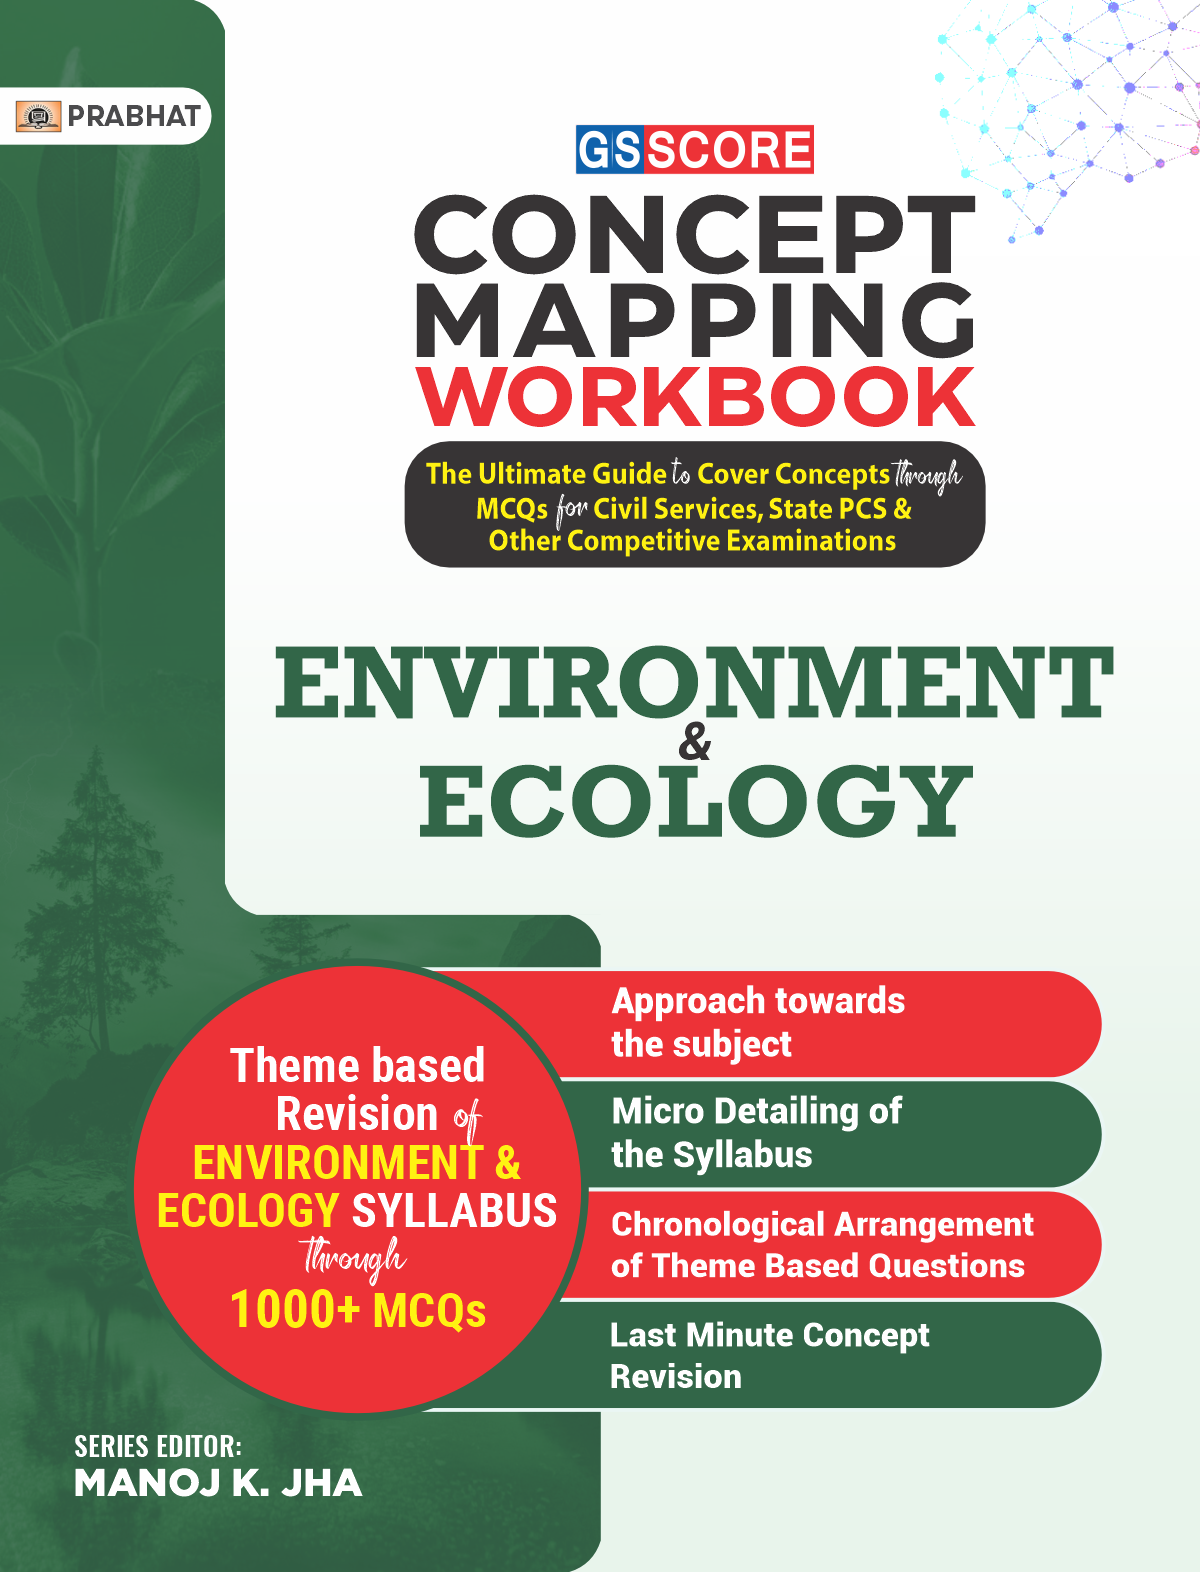 GS SCORE Concept Mapping Workbook Environment & Ecology